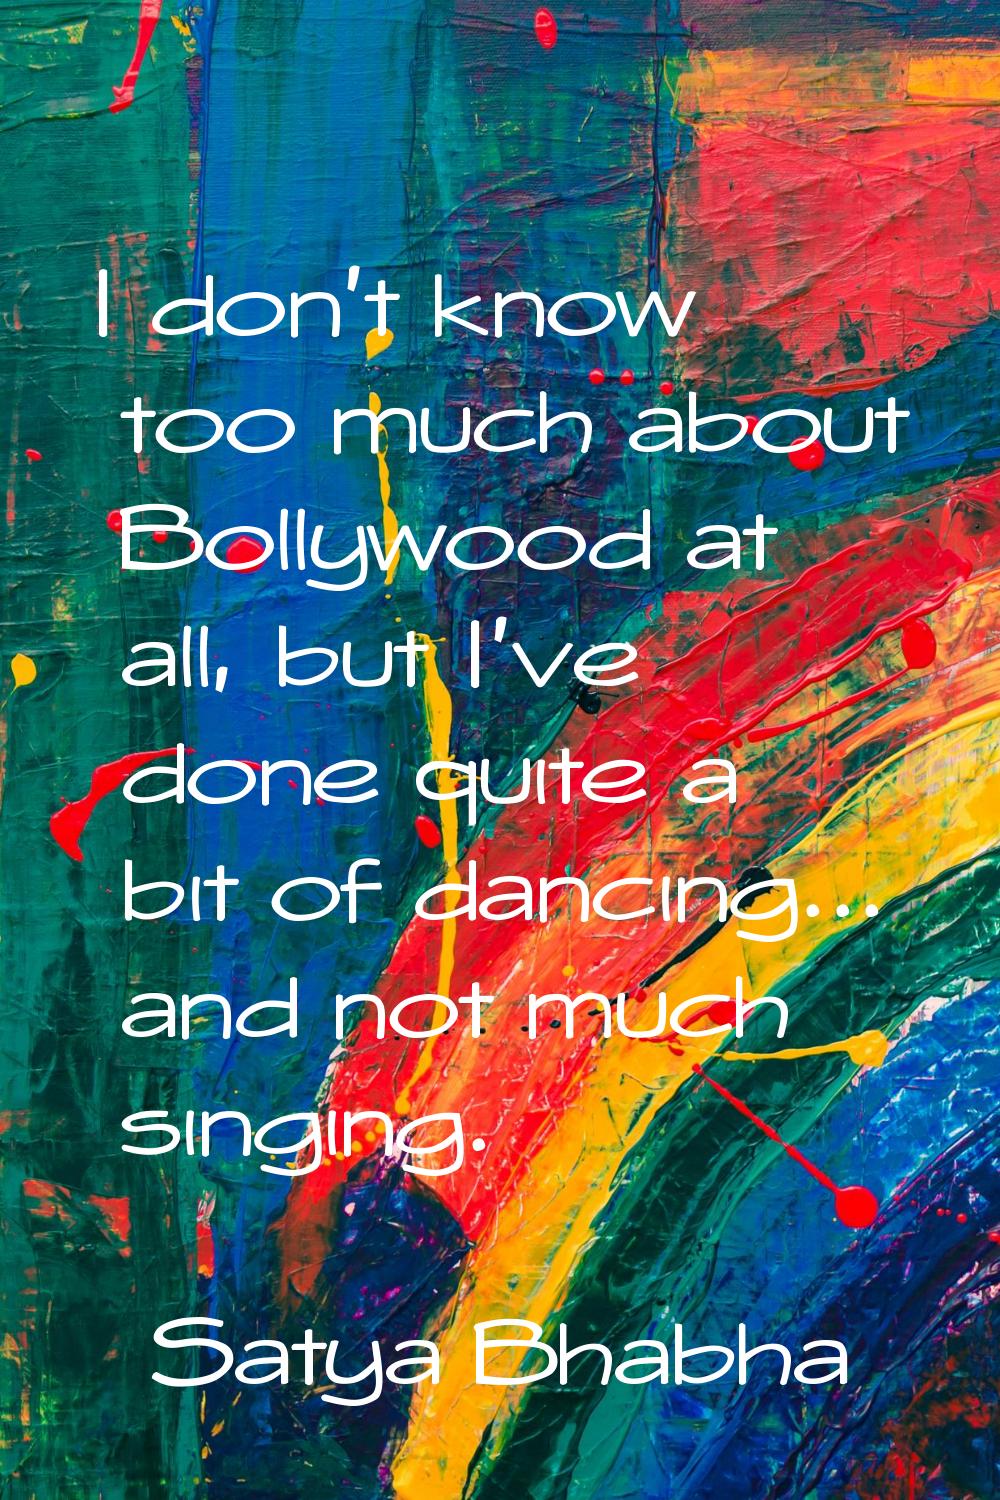 I don't know too much about Bollywood at all, but I've done quite a bit of dancing... and not much 